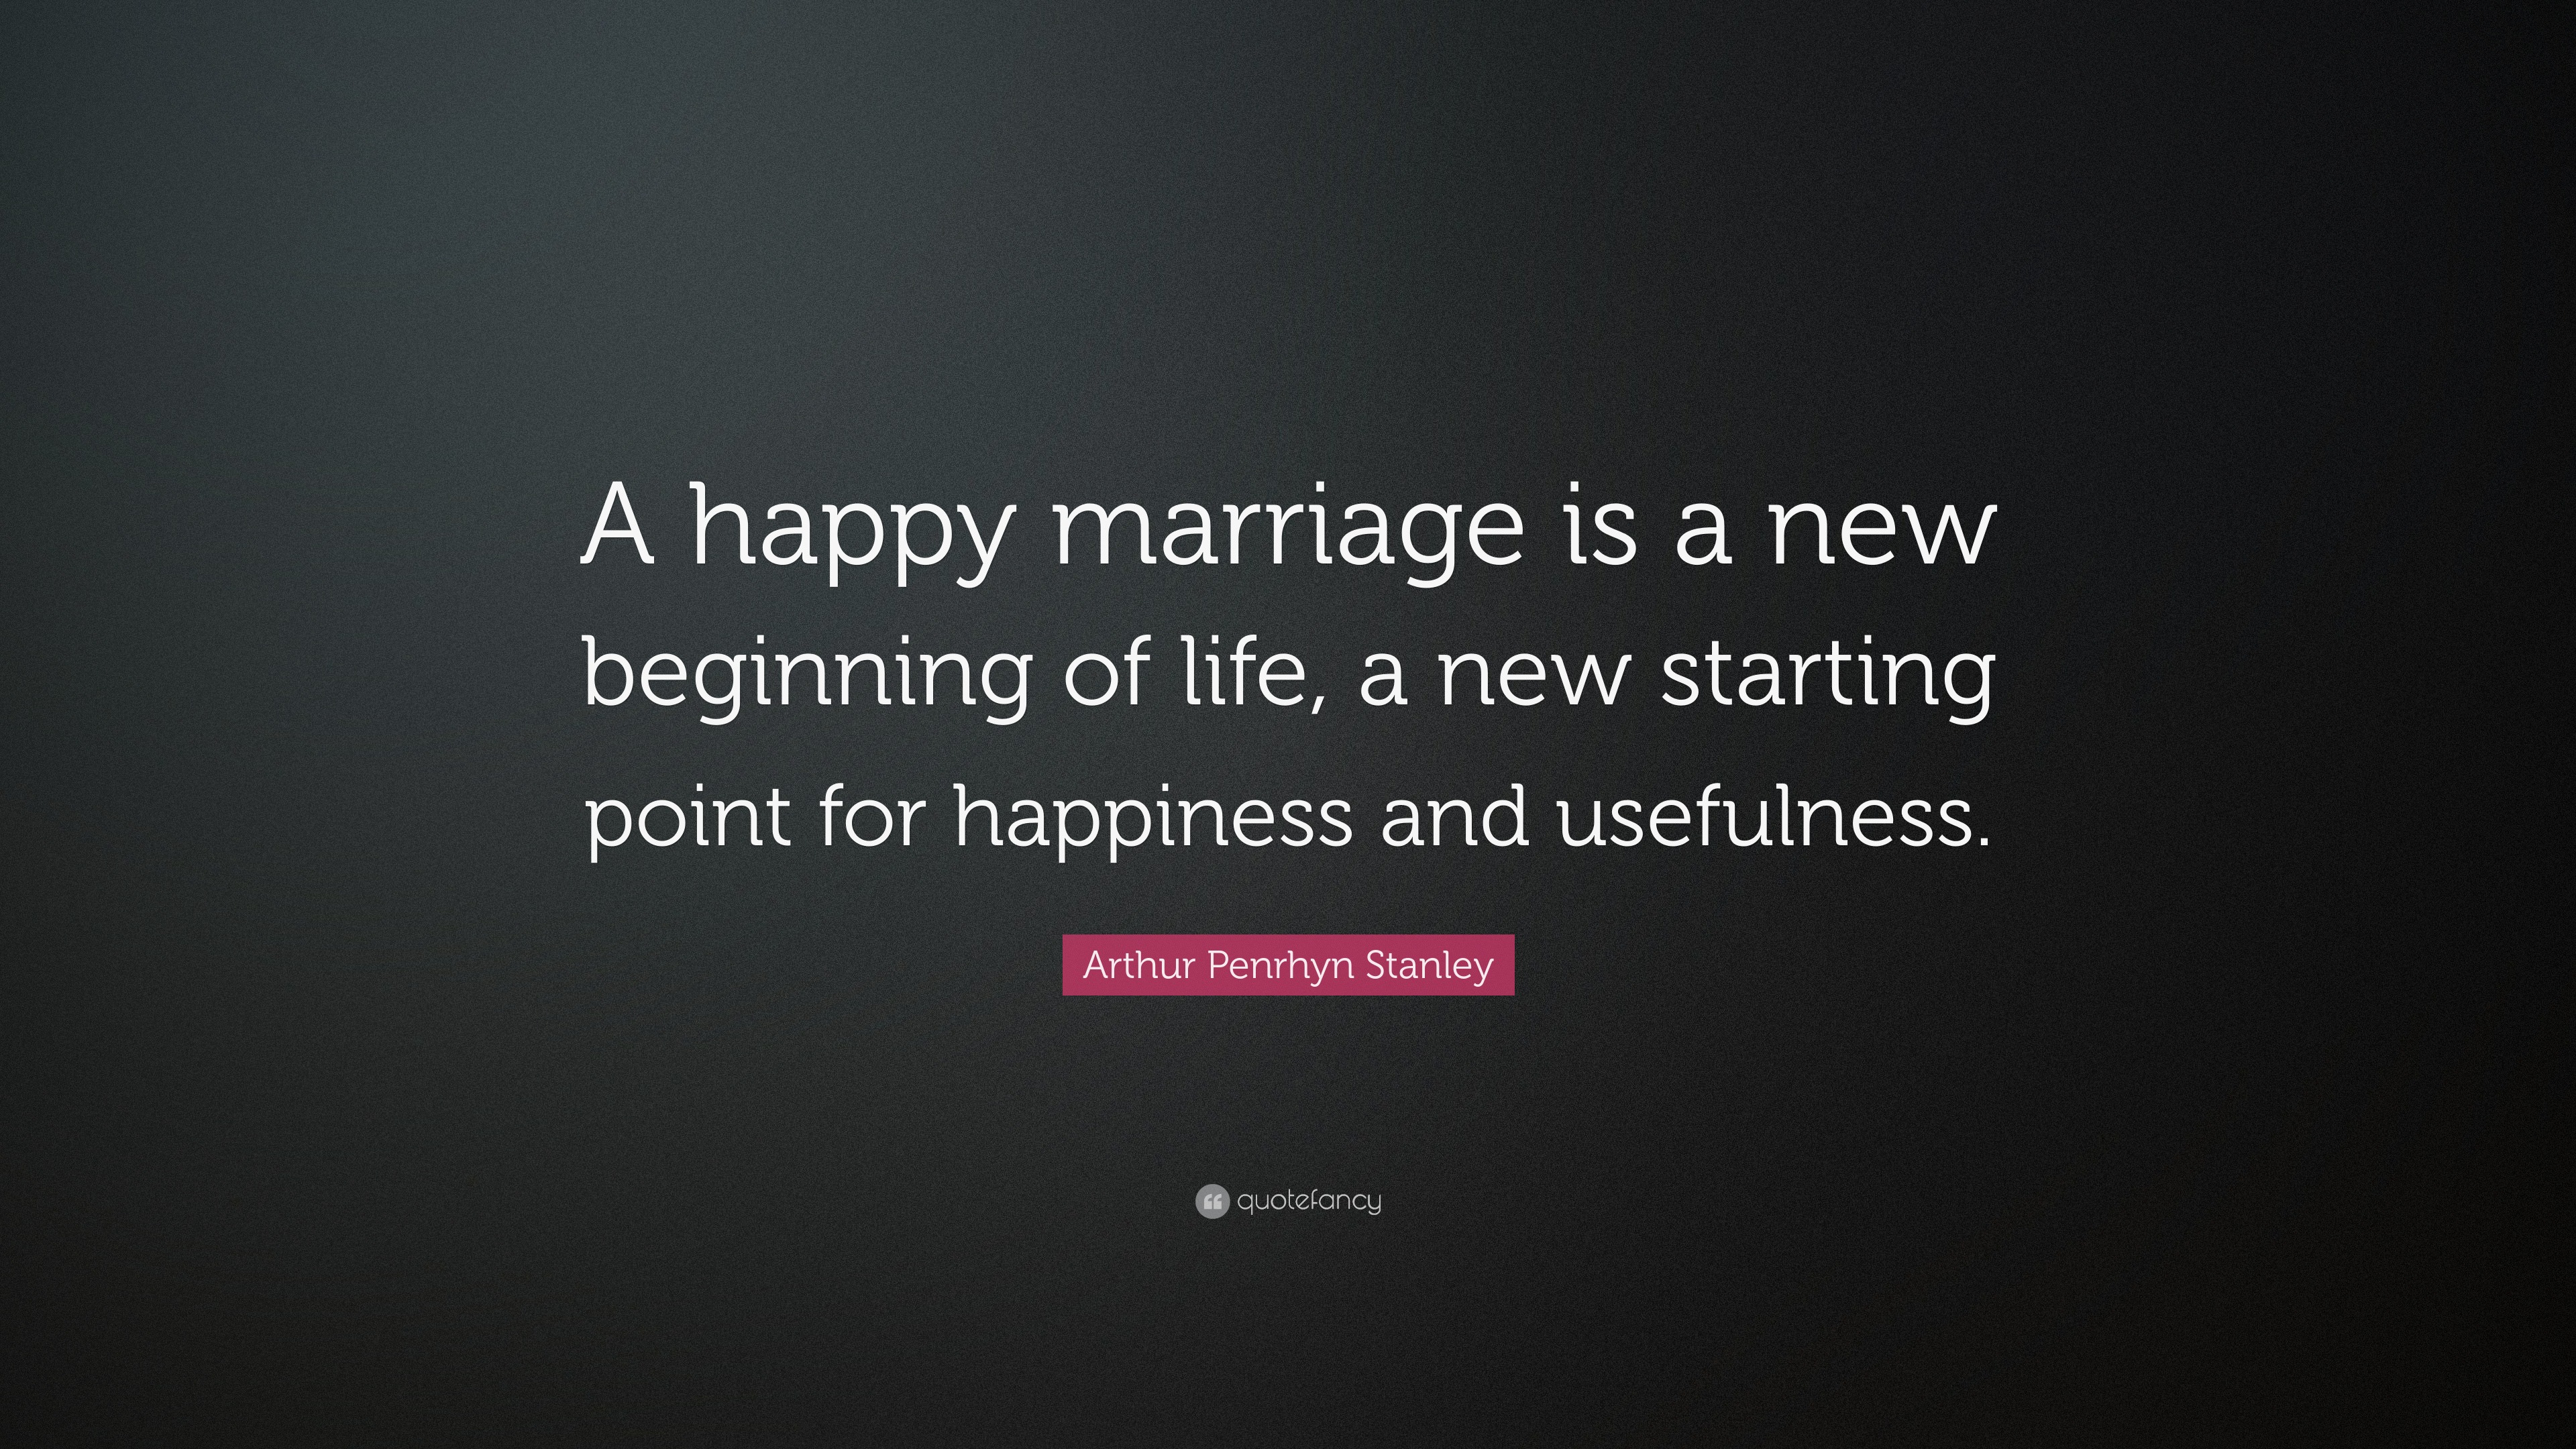 Arthur Penrhyn Stanley Quote “A happy marriage is a new beginning of life